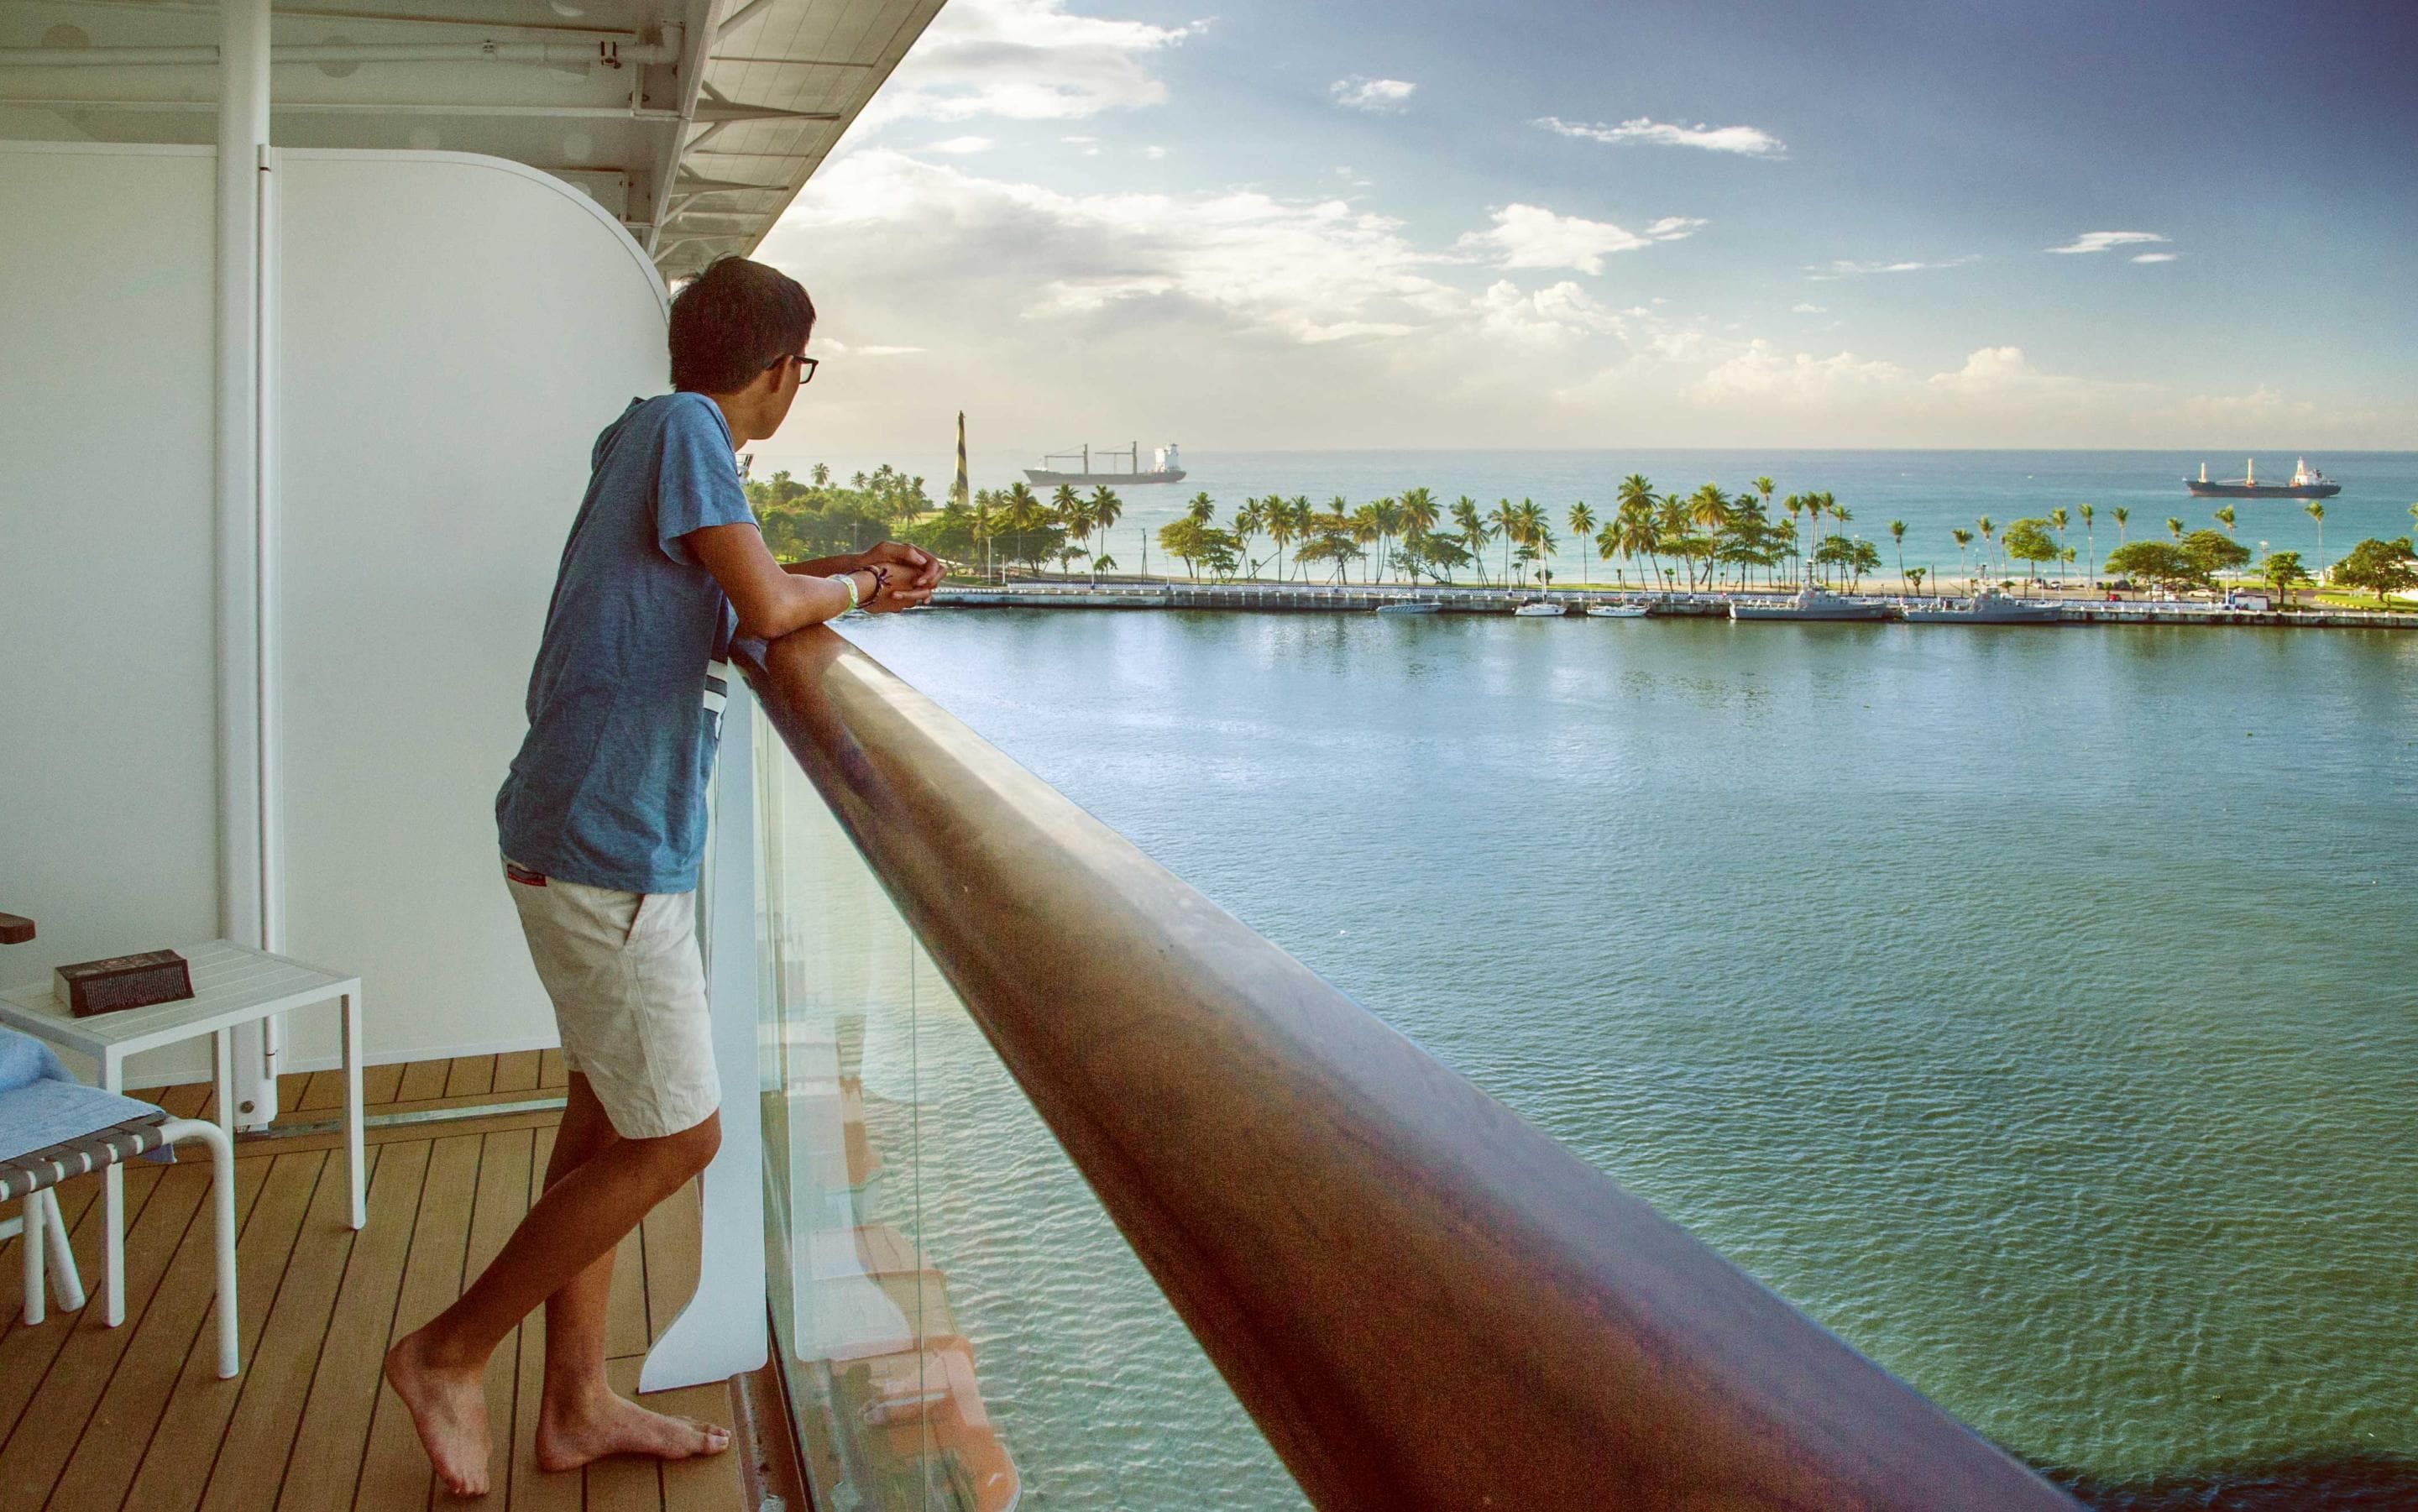 Man looking out over the water from cruise ship balcony